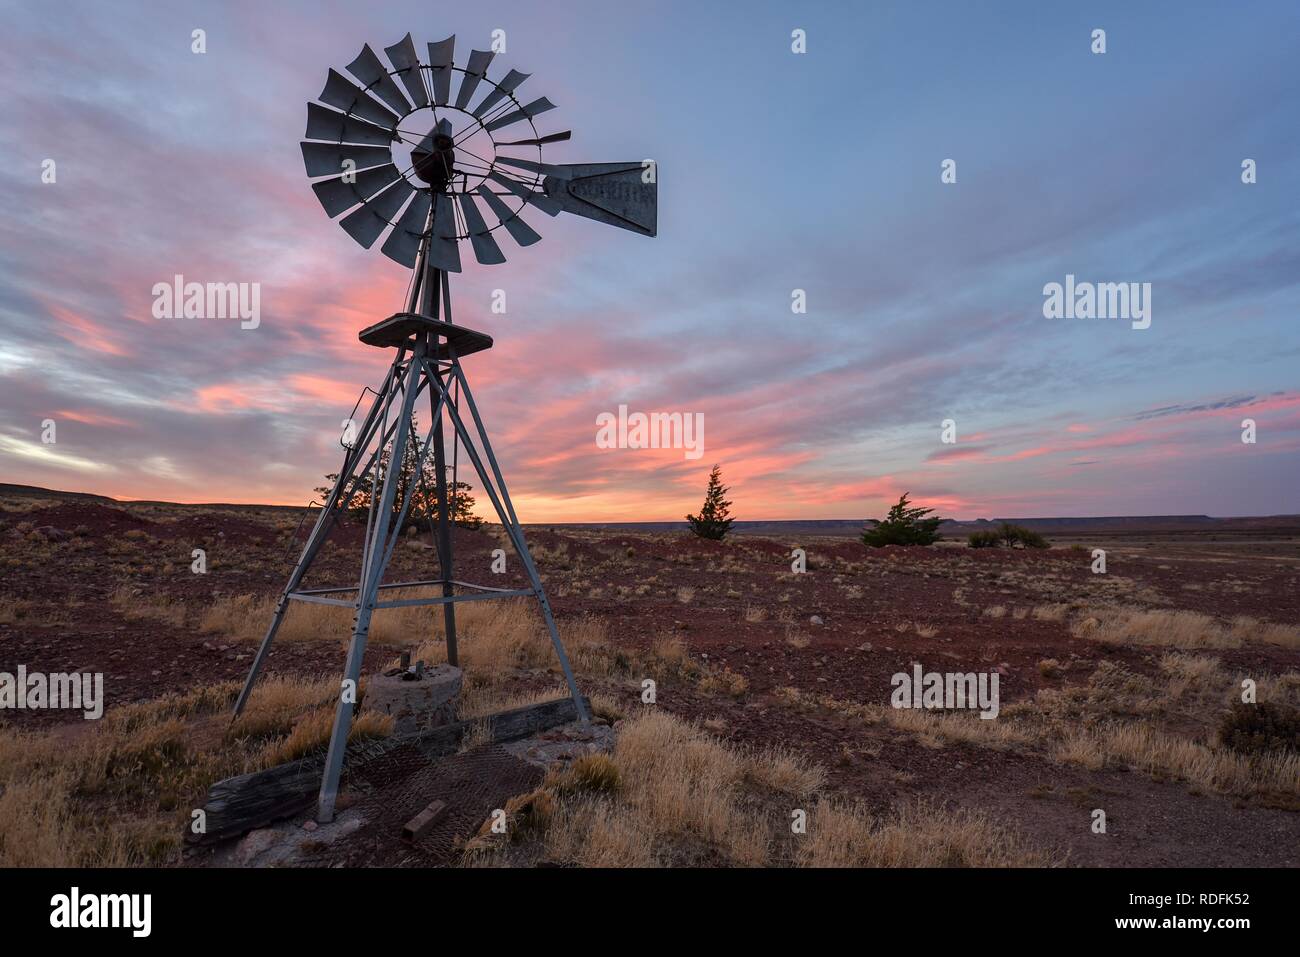 Pampa with old windmill on a farm in Bosques Petrificados de Jaramillo National Park, Patagonia, Argentina Stock Photo